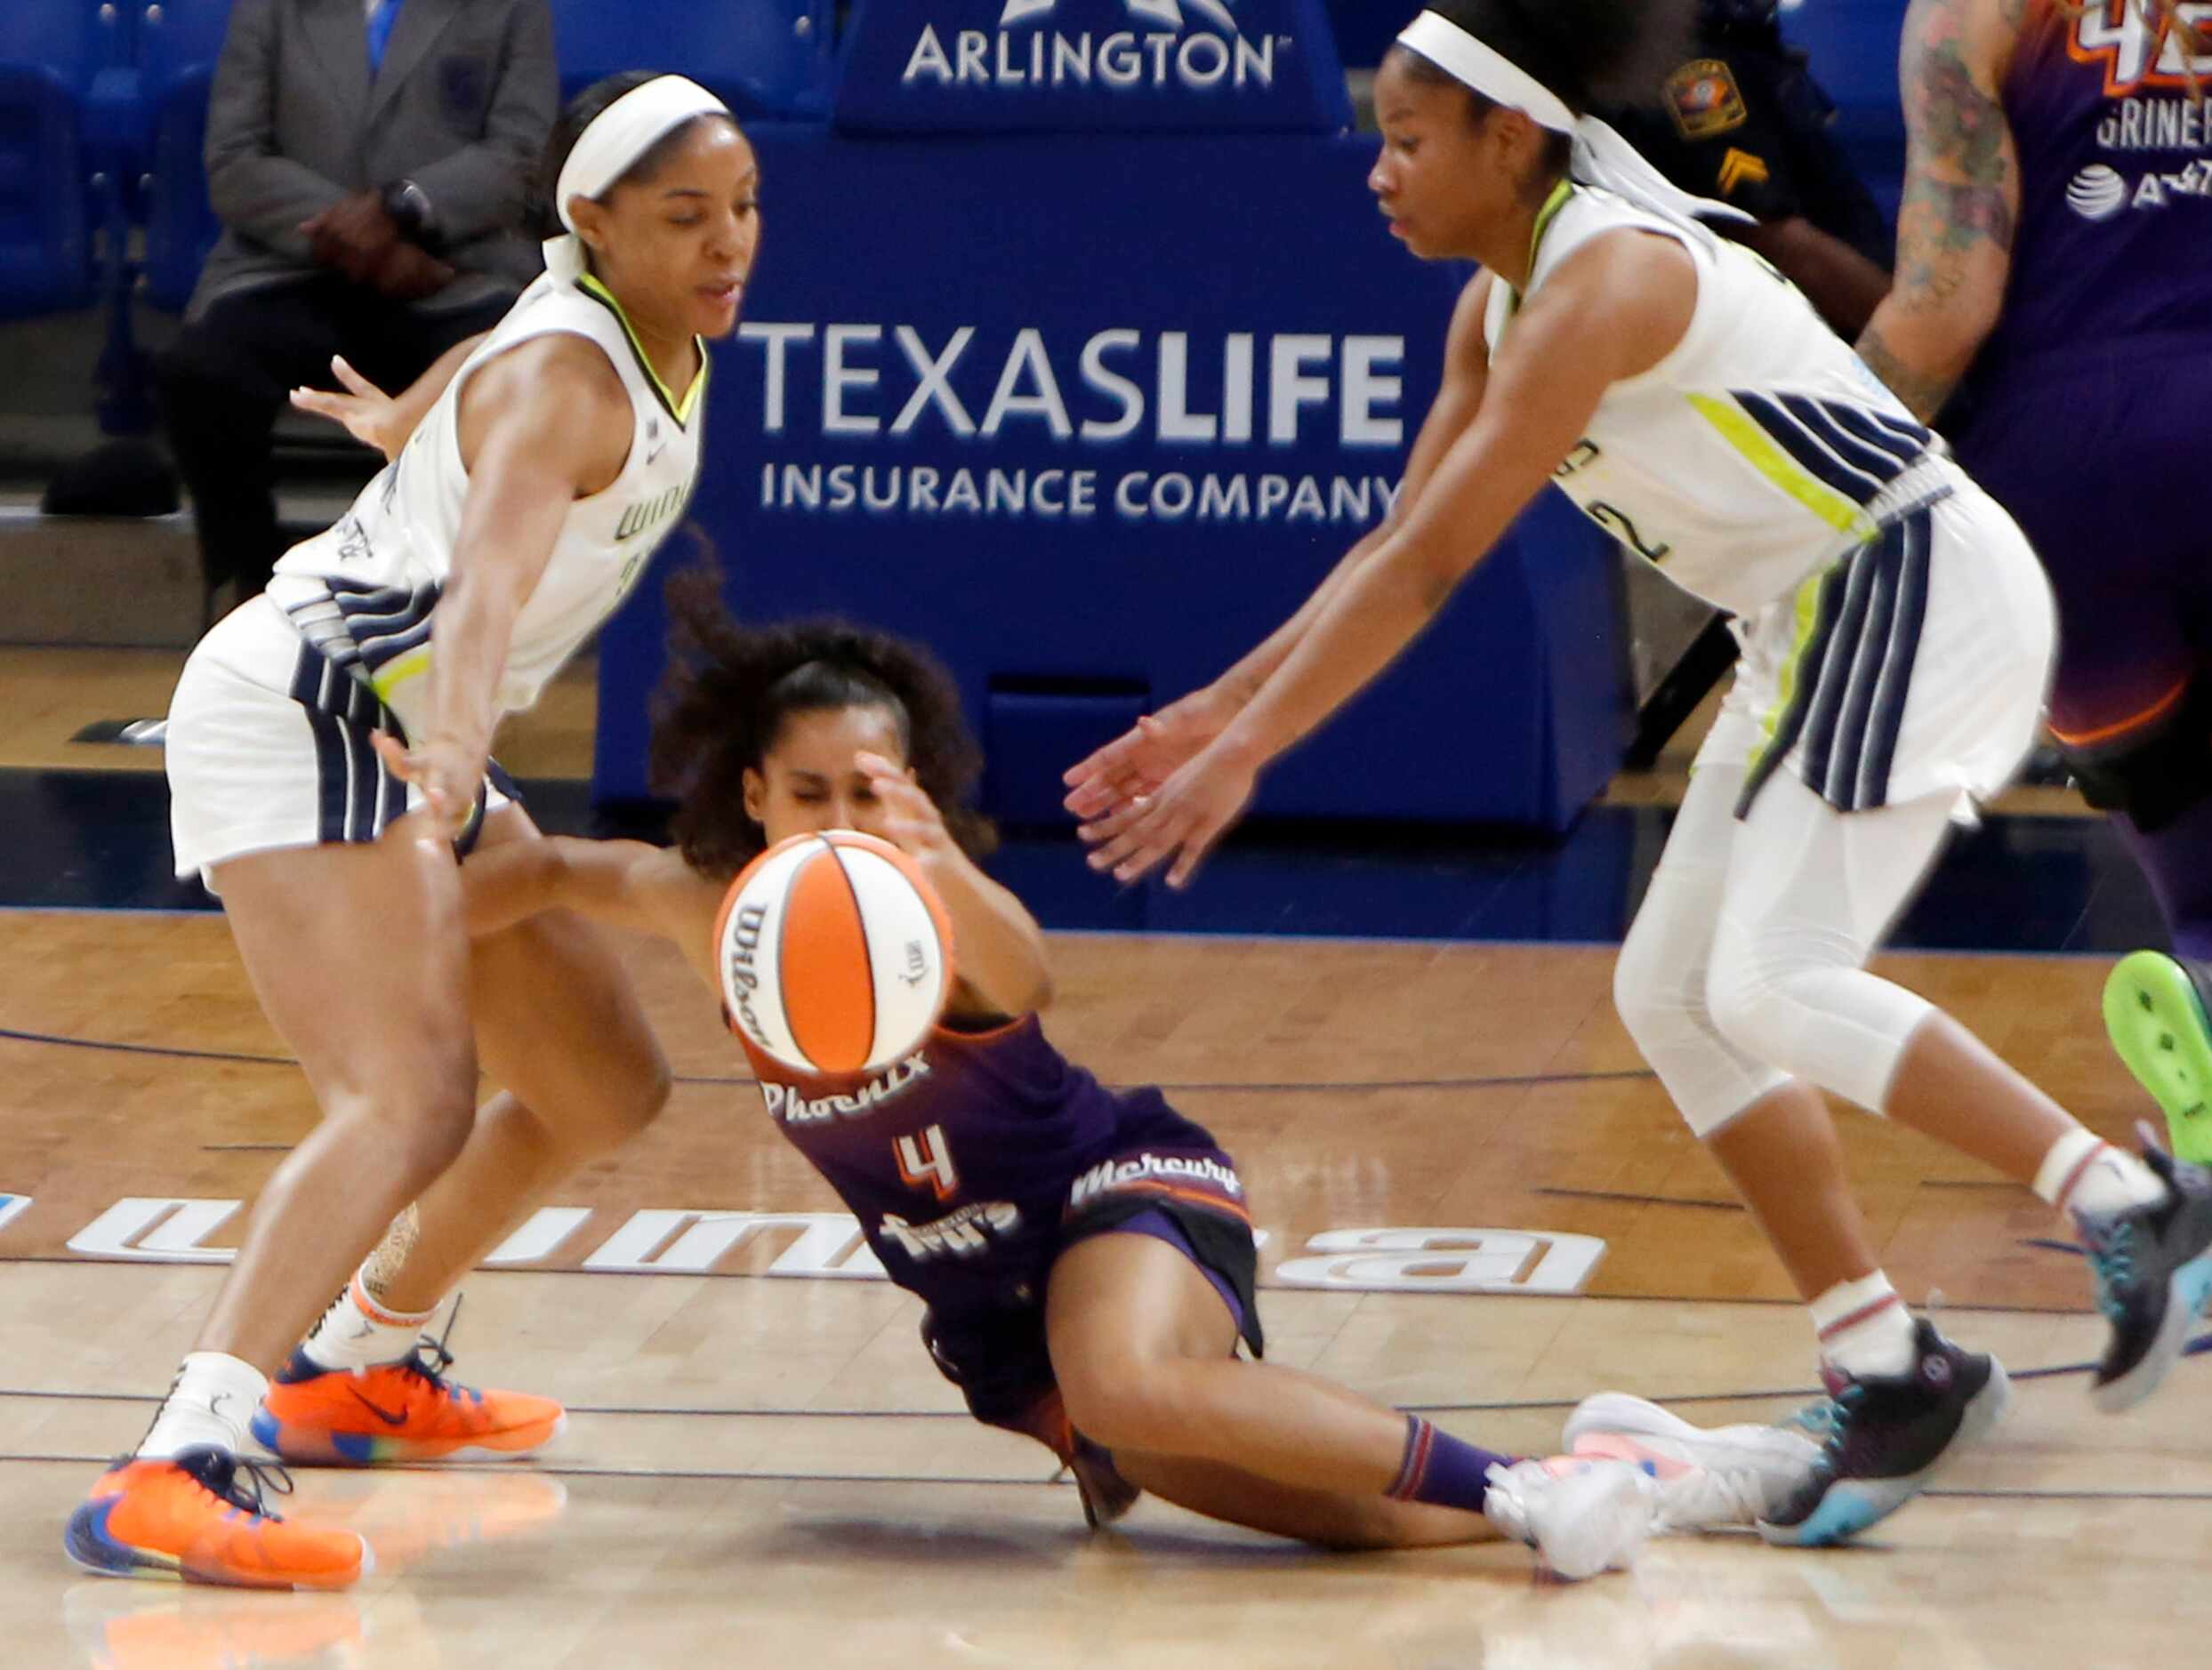 Phoenix guard Shylar Diggins-Smith (4) loses the ball after being tripped by a teammate as...